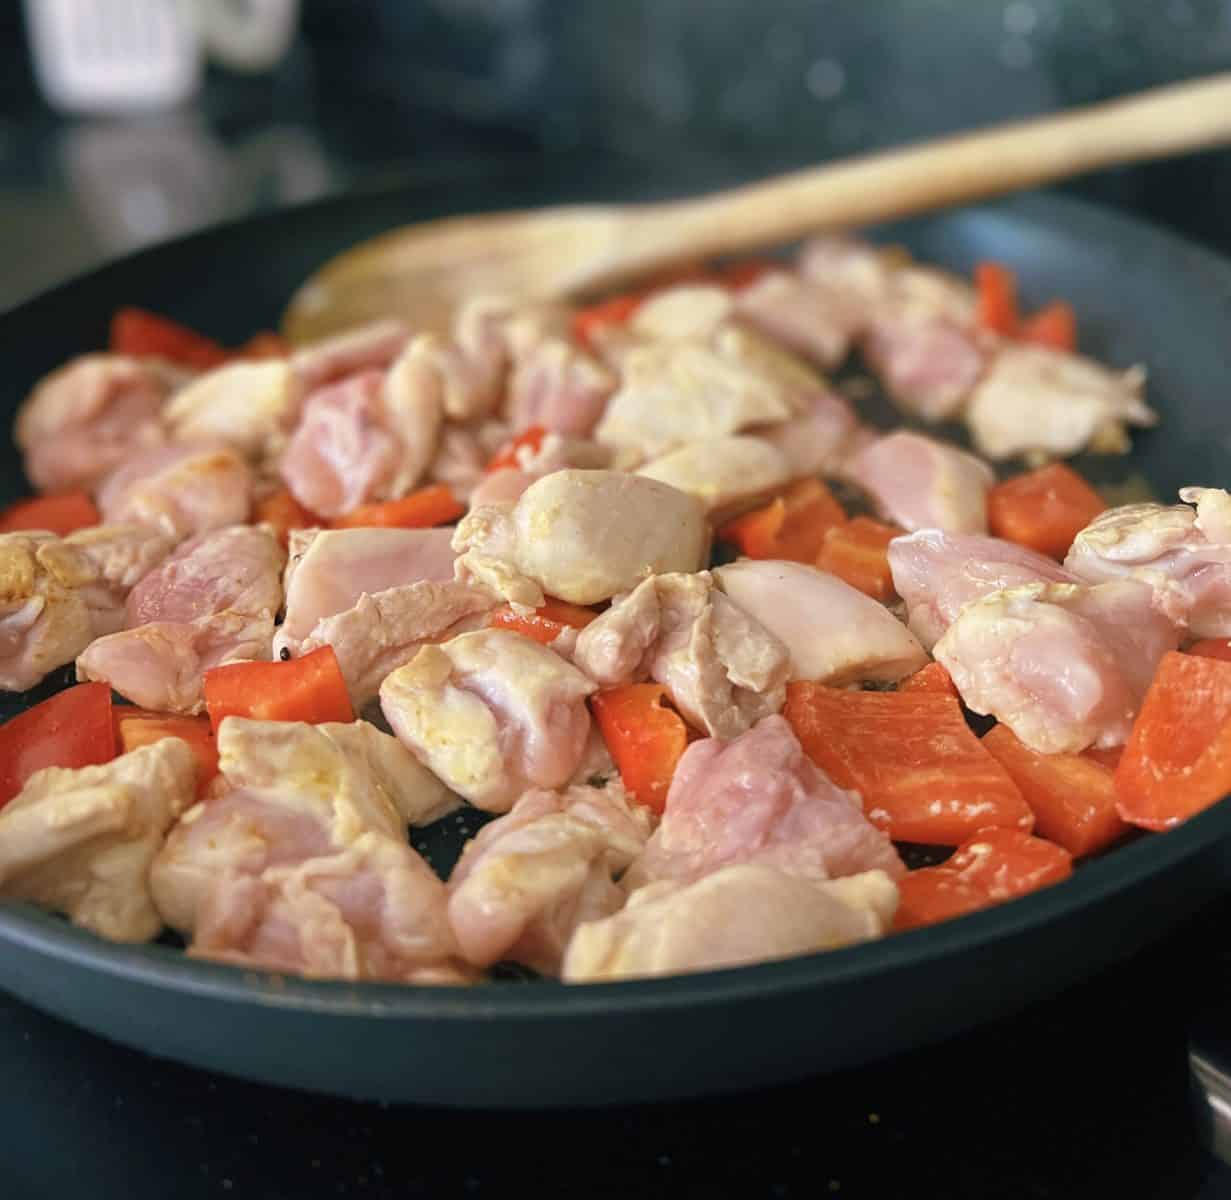 chicken, peppers and spices in a frying pan